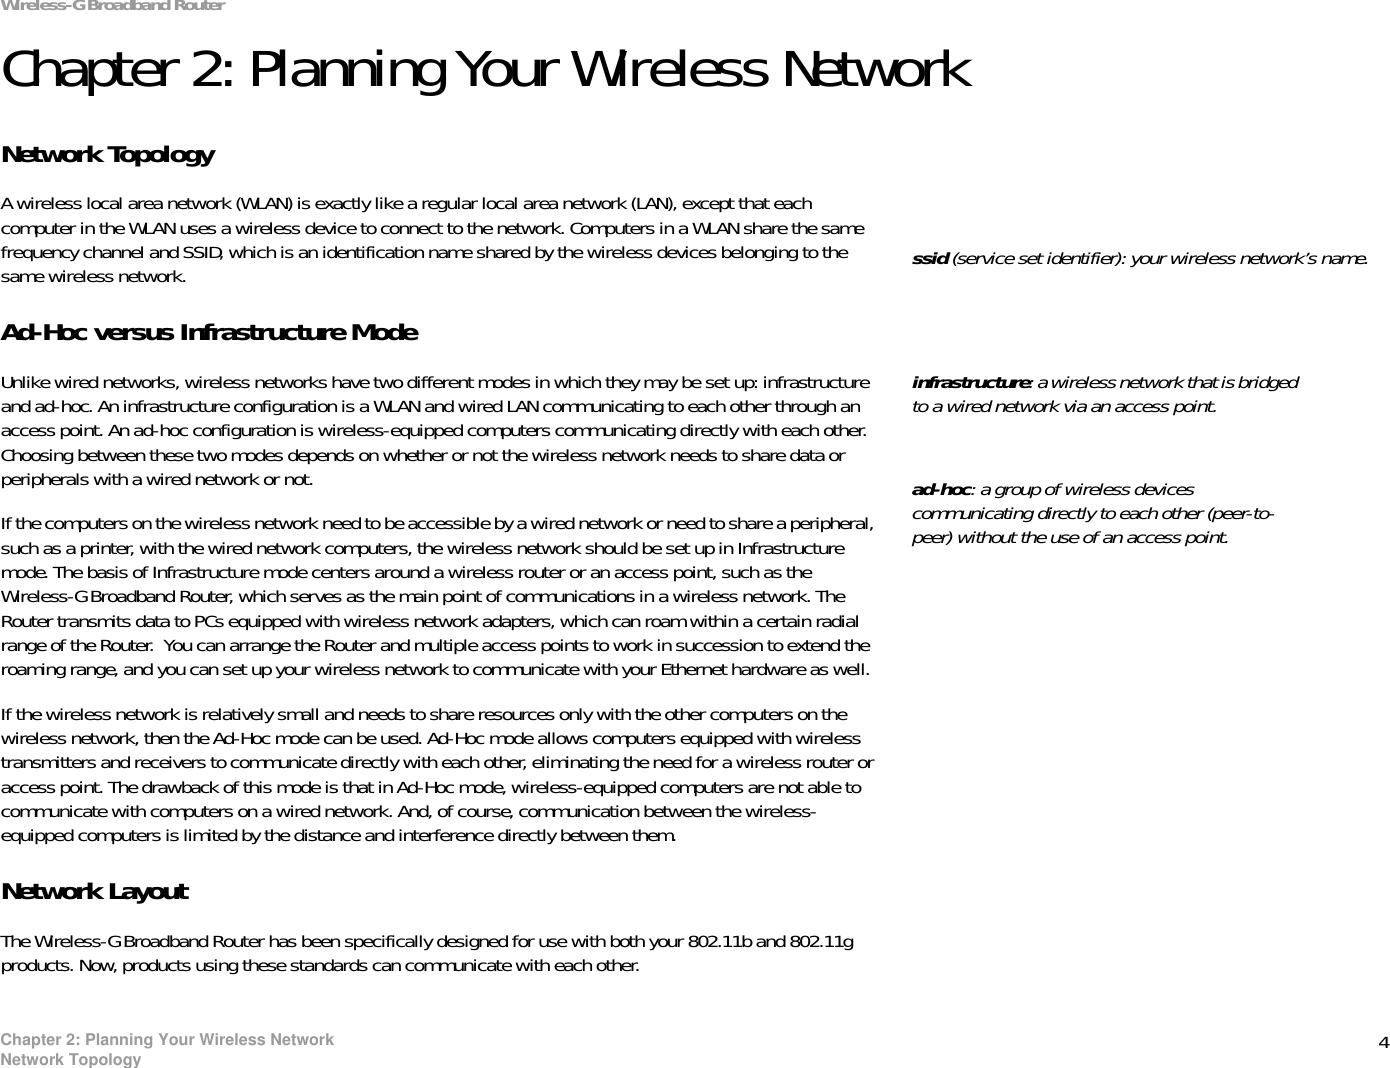 4Chapter 2: Planning Your Wireless NetworkNetwork TopologyWireless-G Broadband RouterChapter 2: Planning Your Wireless NetworkNetwork TopologyA wireless local area network (WLAN) is exactly like a regular local area network (LAN), except that each computer in the WLAN uses a wireless device to connect to the network. Computers in a WLAN share the same frequency channel and SSID, which is an identification name shared by the wireless devices belonging to the same wireless network.Ad-Hoc versus Infrastructure ModeUnlike wired networks, wireless networks have two different modes in which they may be set up: infrastructure and ad-hoc. An infrastructure configuration is a WLAN and wired LAN communicating to each other through an access point. An ad-hoc configuration is wireless-equipped computers communicating directly with each other. Choosing between these two modes depends on whether or not the wireless network needs to share data or peripherals with a wired network or not. If the computers on the wireless network need to be accessible by a wired network or need to share a peripheral, such as a printer, with the wired network computers, the wireless network should be set up in Infrastructure mode. The basis of Infrastructure mode centers around a wireless router or an access point, such as the Wireless-G Broadband Router, which serves as the main point of communications in a wireless network. The Router transmits data to PCs equipped with wireless network adapters, which can roam within a certain radial range of the Router.  You can arrange the Router and multiple access points to work in succession to extend the roaming range, and you can set up your wireless network to communicate with your Ethernet hardware as well. If the wireless network is relatively small and needs to share resources only with the other computers on the wireless network, then the Ad-Hoc mode can be used. Ad-Hoc mode allows computers equipped with wireless transmitters and receivers to communicate directly with each other, eliminating the need for a wireless router or access point. The drawback of this mode is that in Ad-Hoc mode, wireless-equipped computers are not able to communicate with computers on a wired network. And, of course, communication between the wireless-equipped computers is limited by the distance and interference directly between them. Network LayoutThe Wireless-G Broadband Router has been specifically designed for use with both your 802.11b and 802.11g products. Now, products using these standards can communicate with each other.infrastructure: a wireless network that is bridged to a wired network via an access point.ssid (service set identifier): your wireless network’s name.ad-hoc: a group of wireless devices communicating directly to each other (peer-to-peer) without the use of an access point.